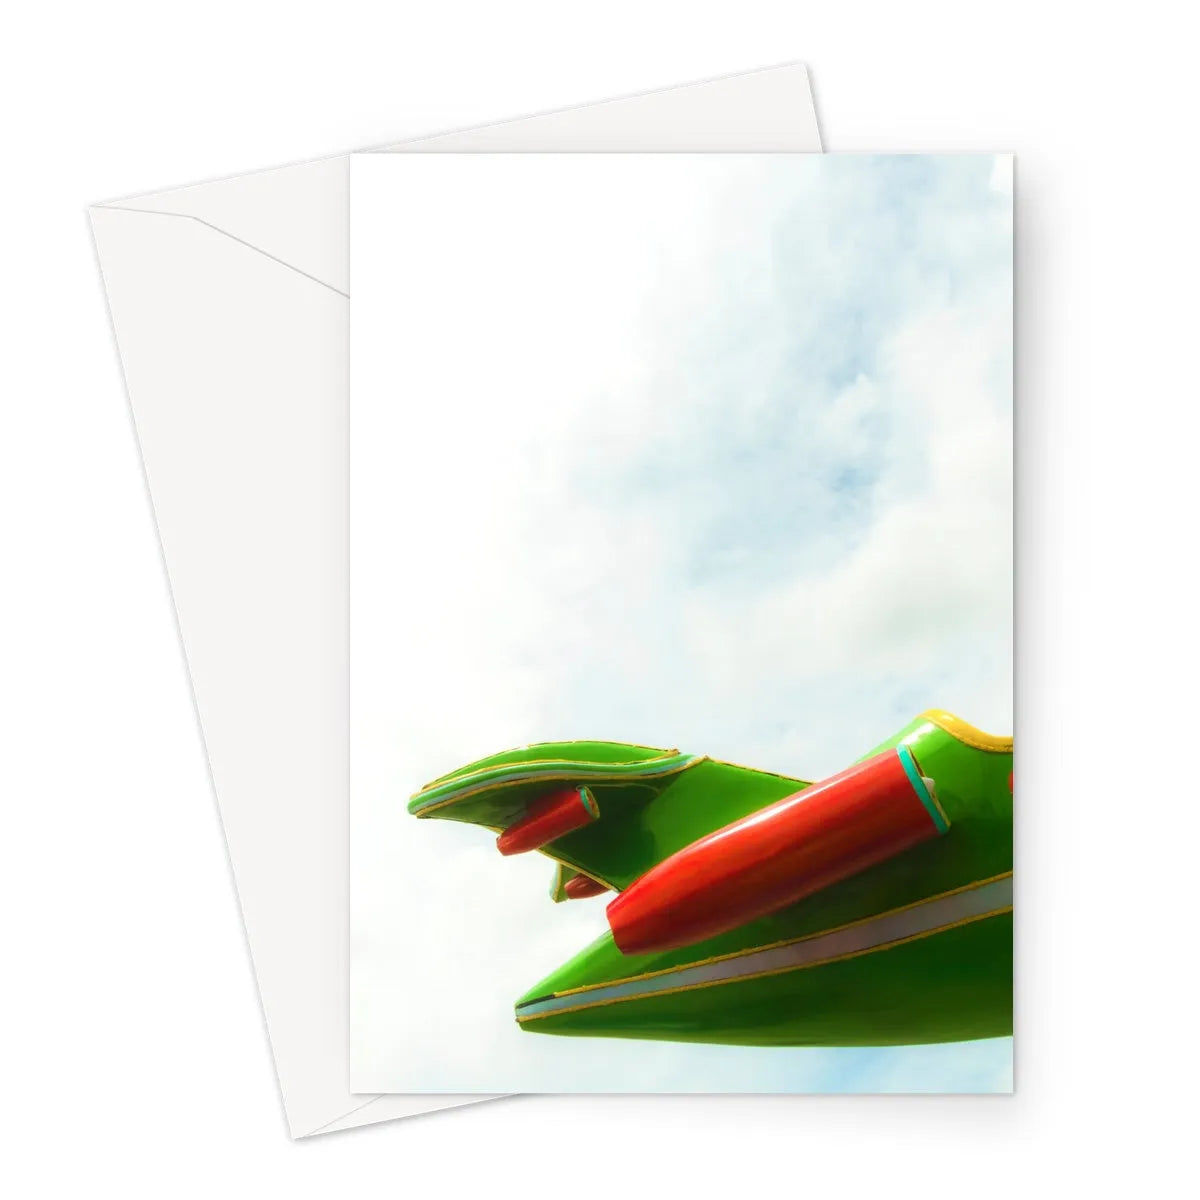 Flying High 3 Greeting Card - A5 Portrait / 10 Cards - Greeting & Note Cards - Aesthetic Art